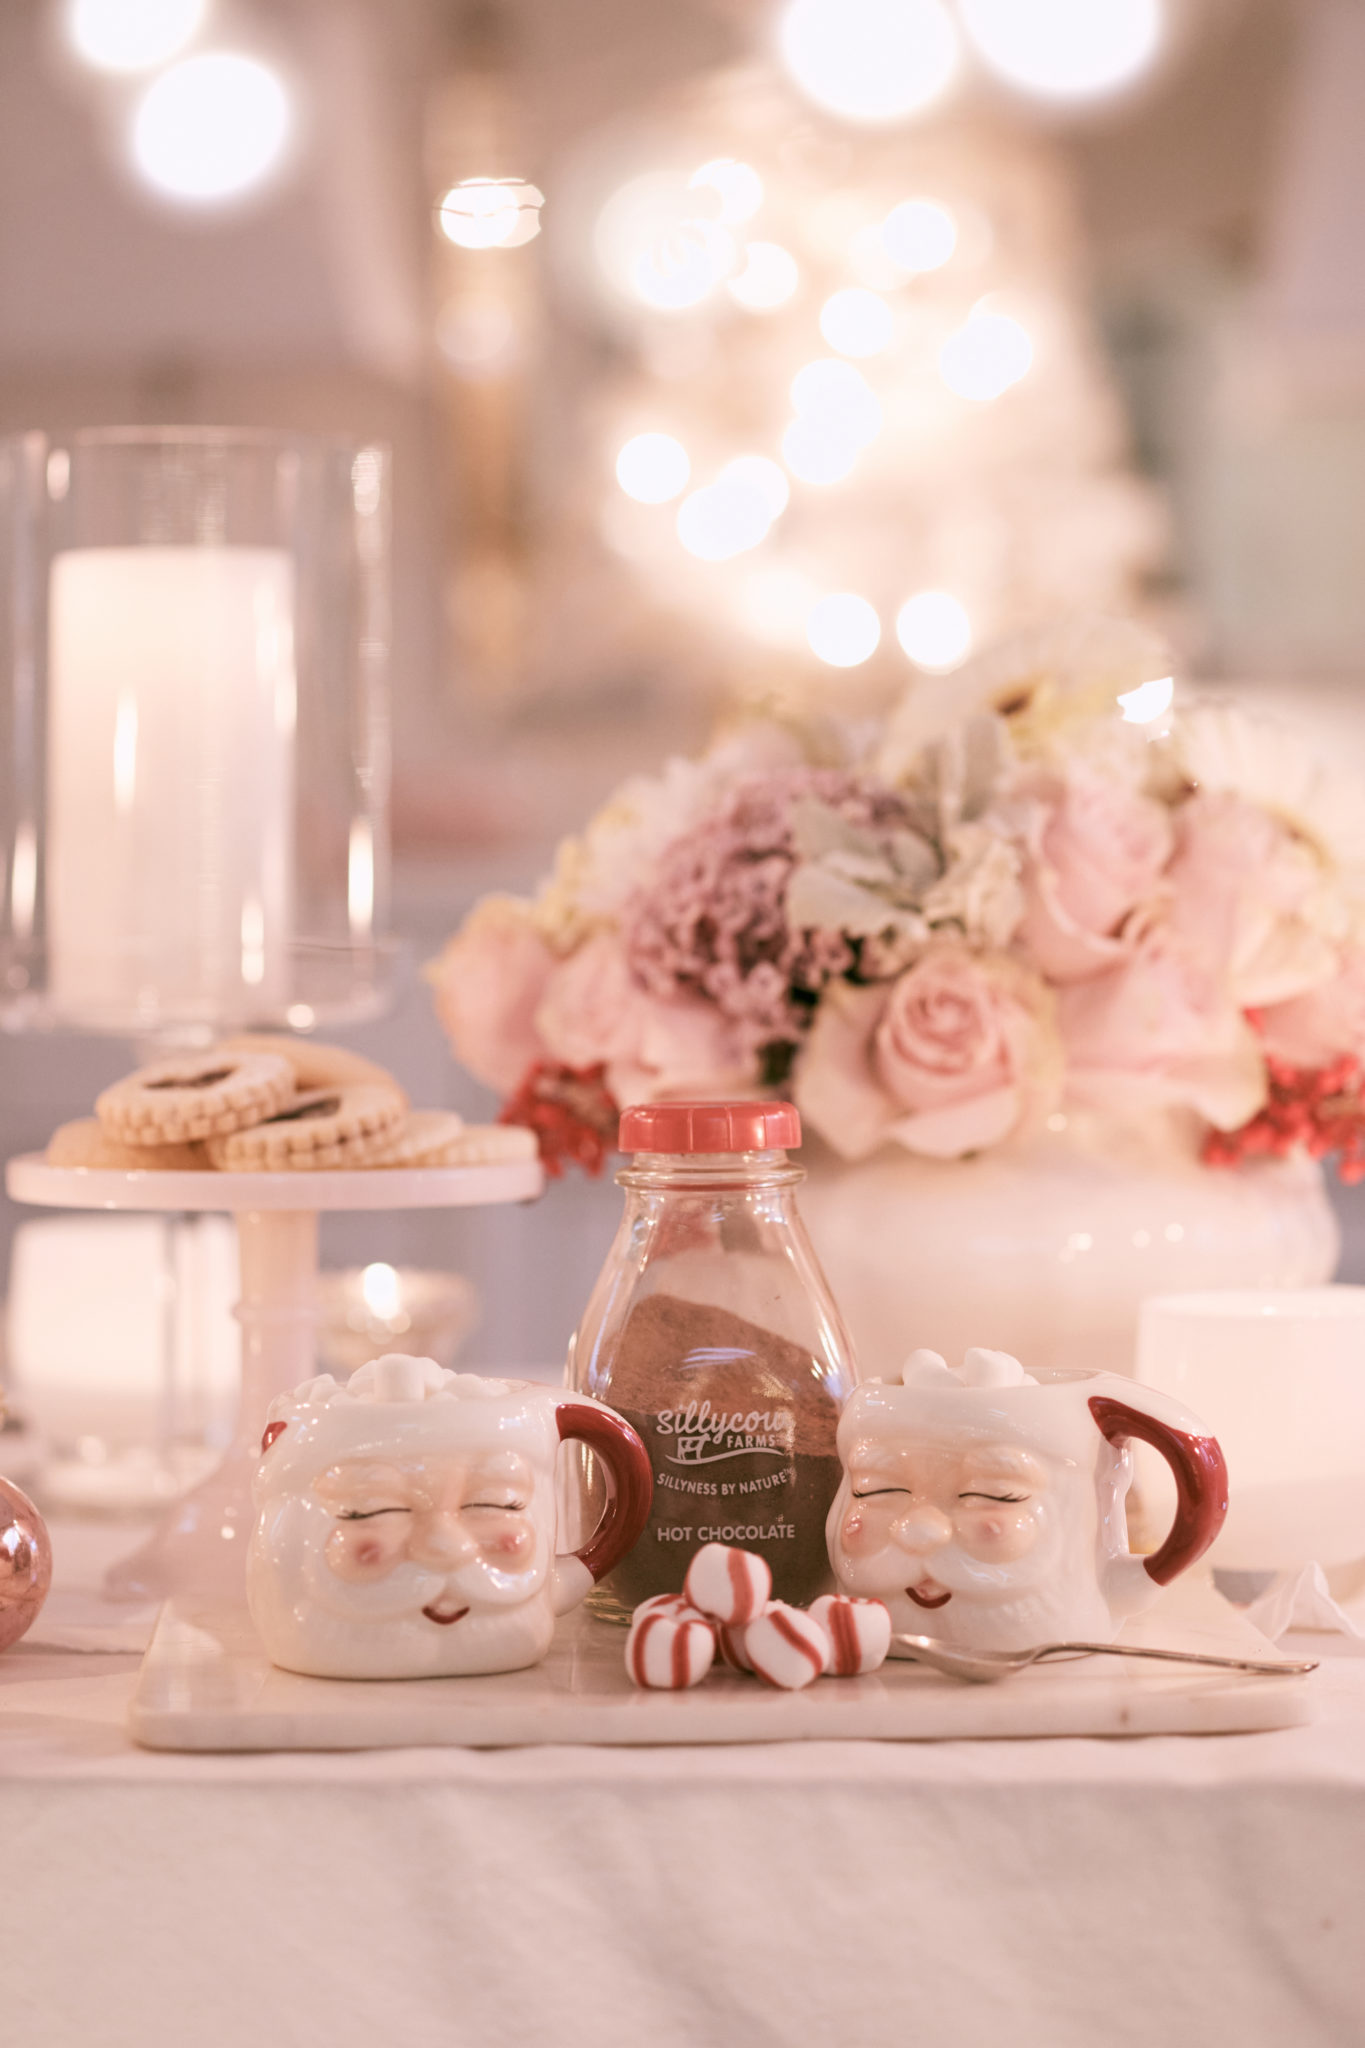 Setting a Christmas table is easy when you have a few decor elements. This Christmas night tour includes a cute mason jar cocoa gift with a free printable. Visit this post for some Christmas inspiration! #holidaytable #christmastable 